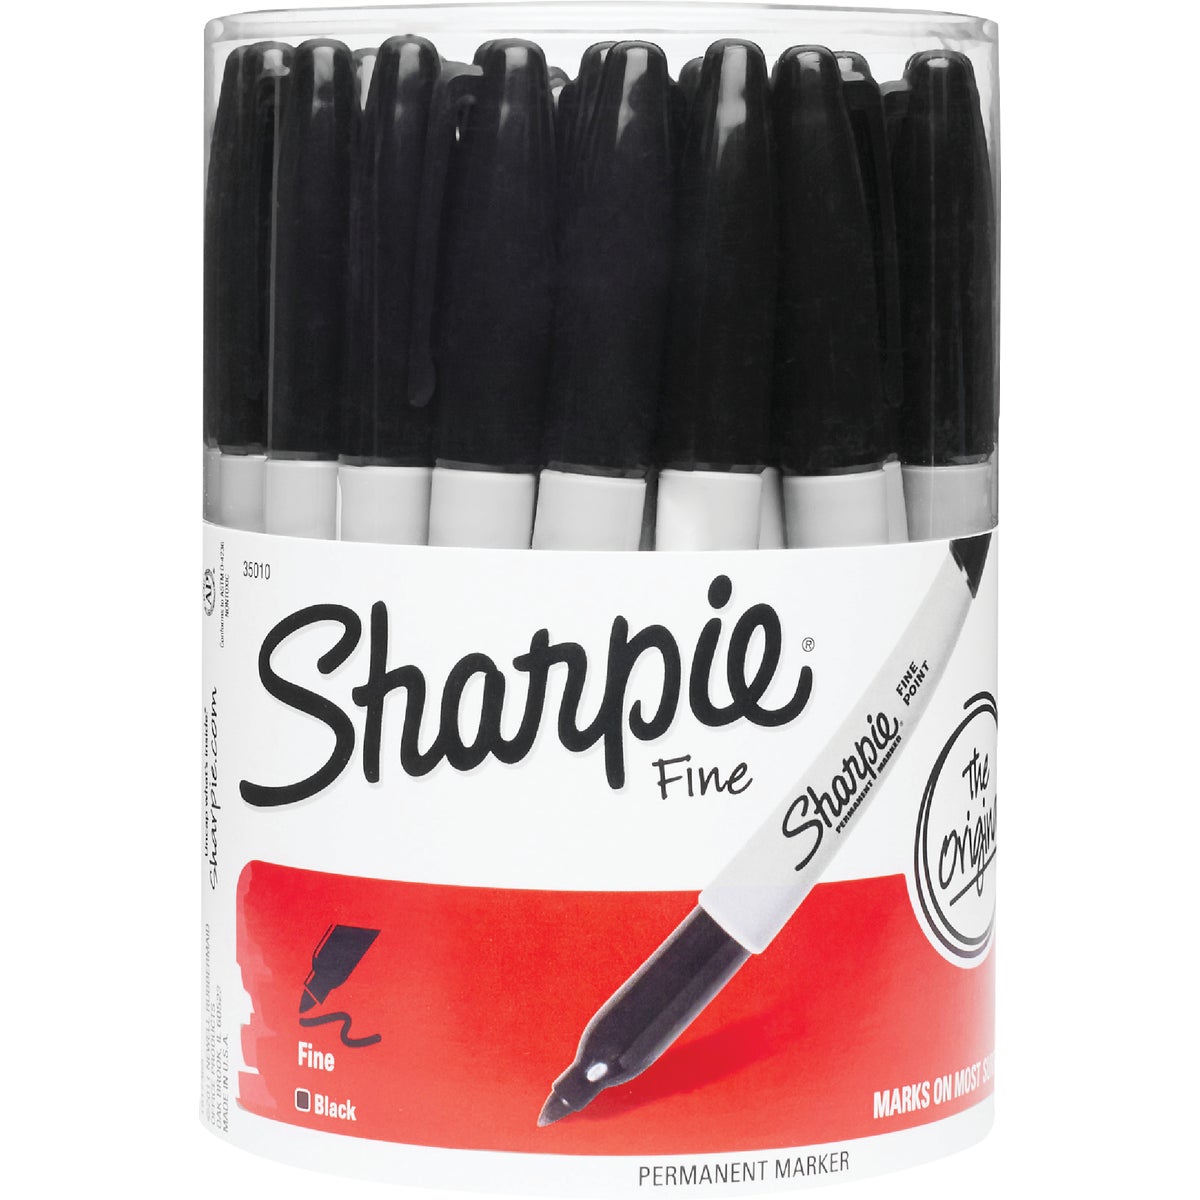 Item 971731, Impulse display contains (36) black Sharpie permanent marking pen with a 